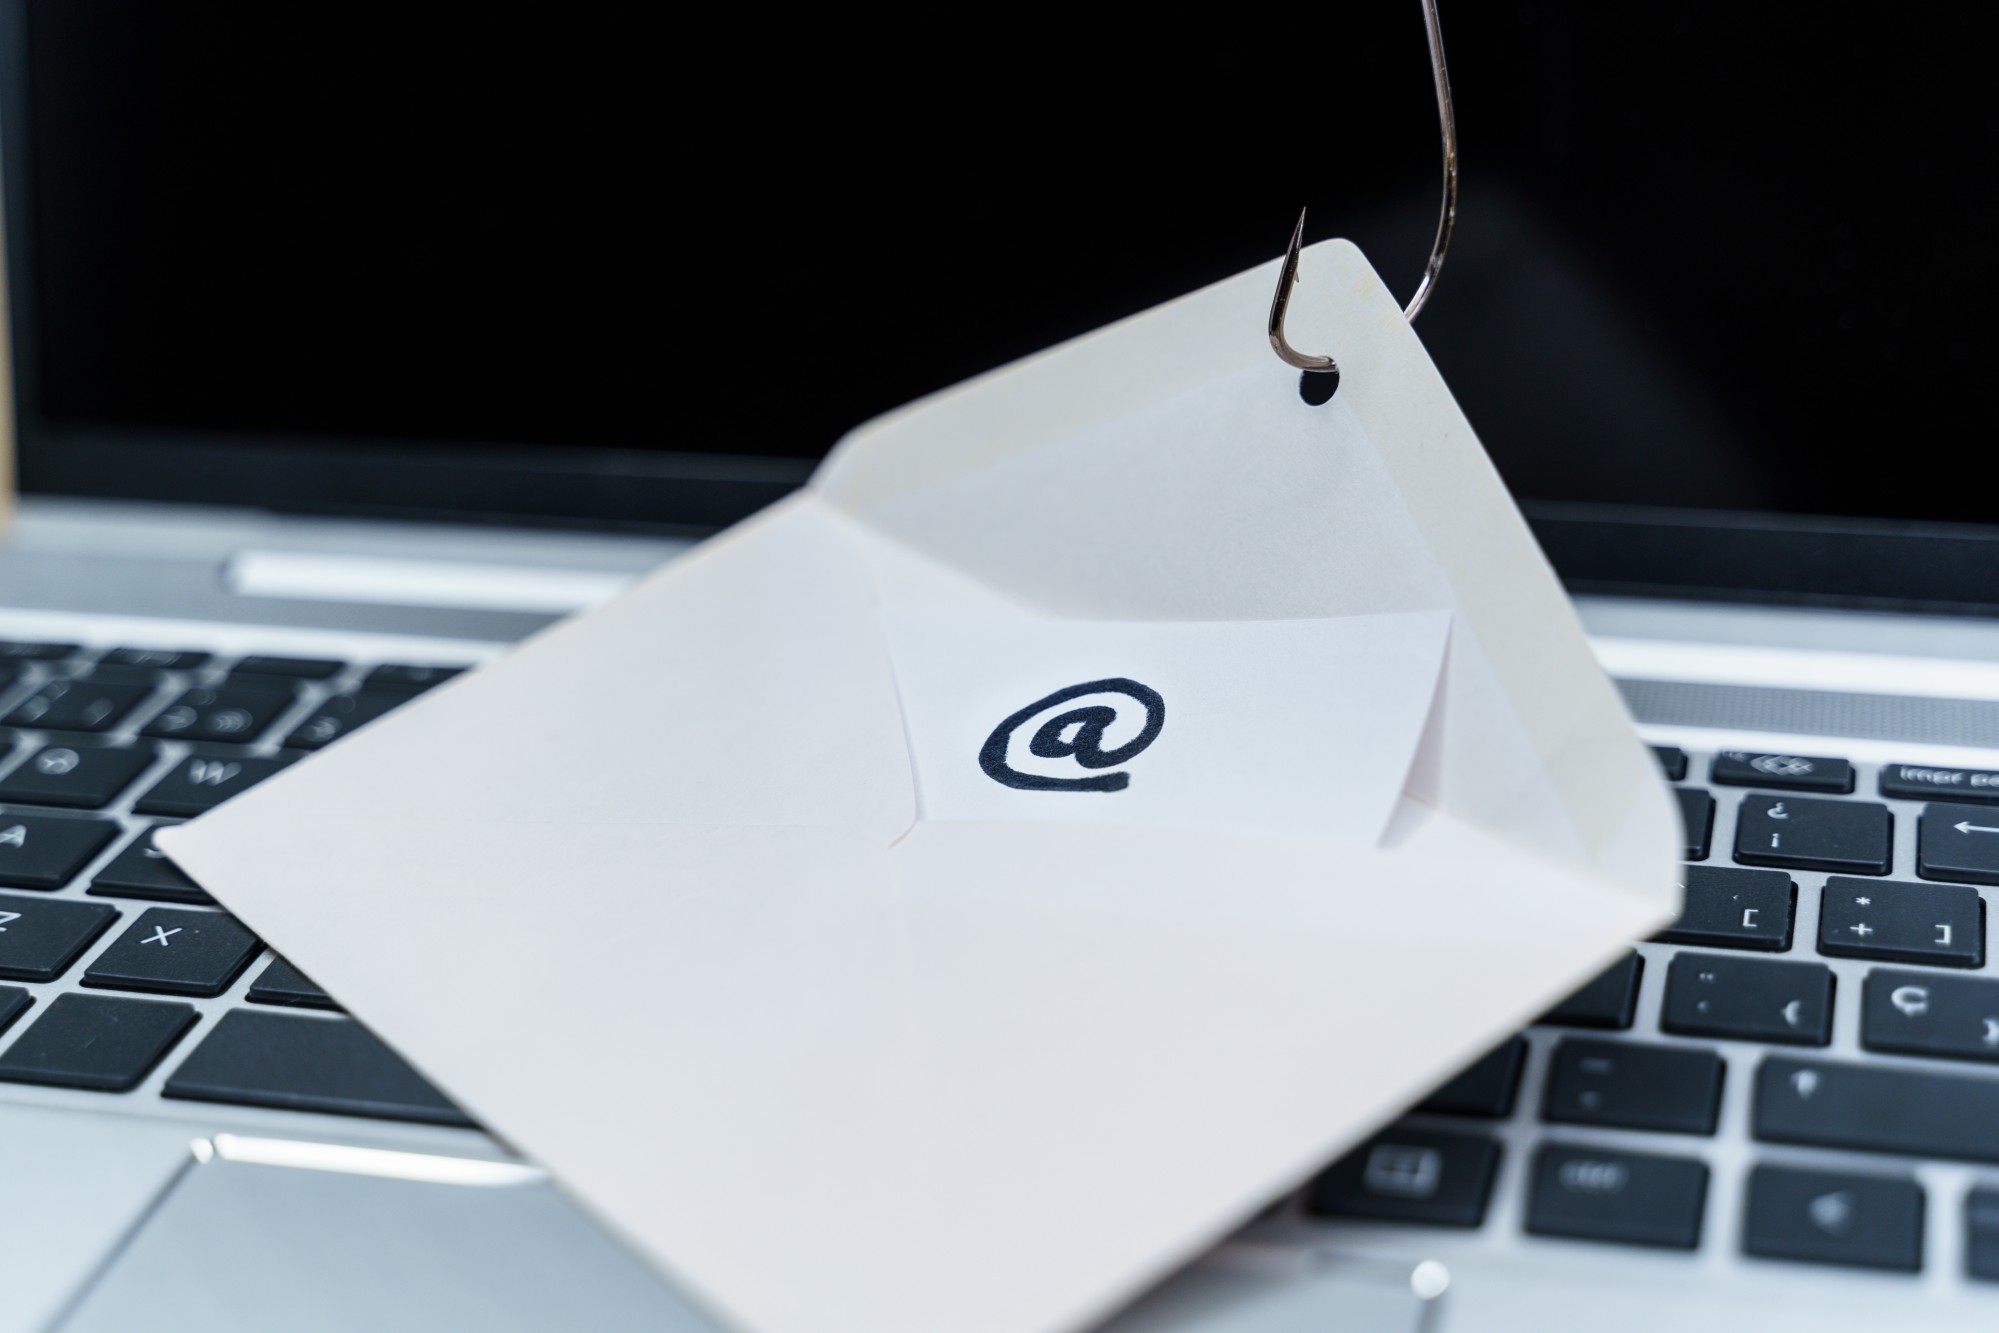 Authorities have recorded a downward trend in the number of phishing cases since 2019. Photo: Shutterstock Images